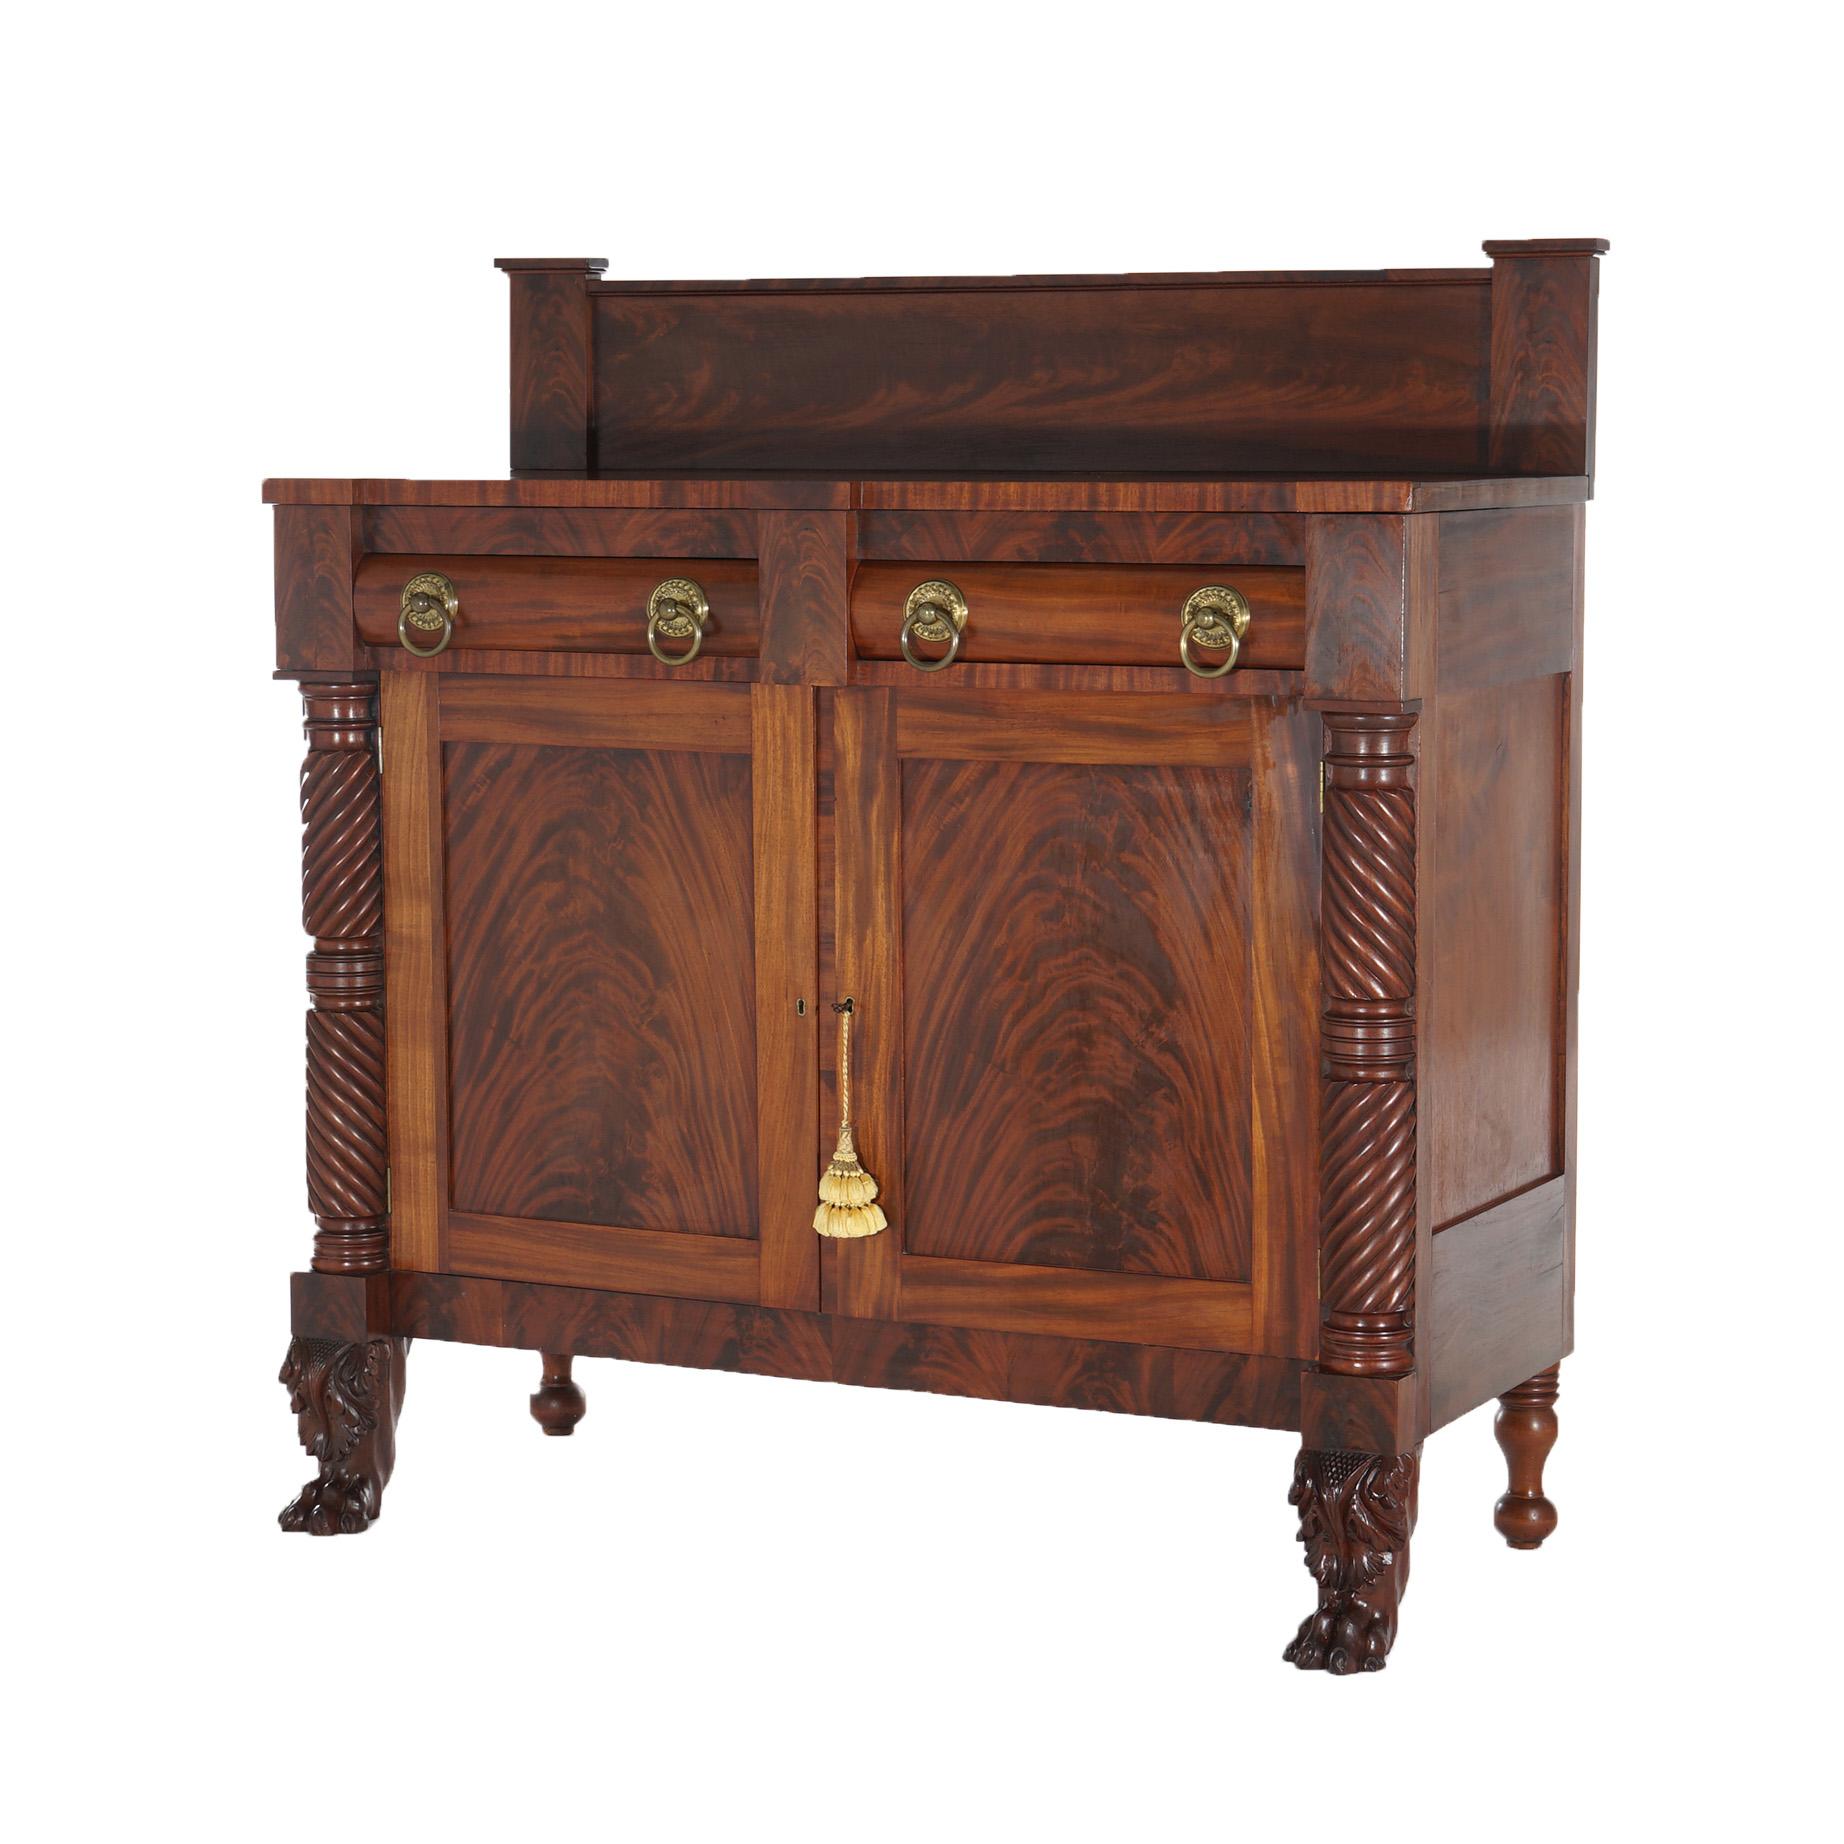 Antique American Empire Flame Mahogany Marble Top Linen Press Sideboard C1840 In Good Condition For Sale In Big Flats, NY